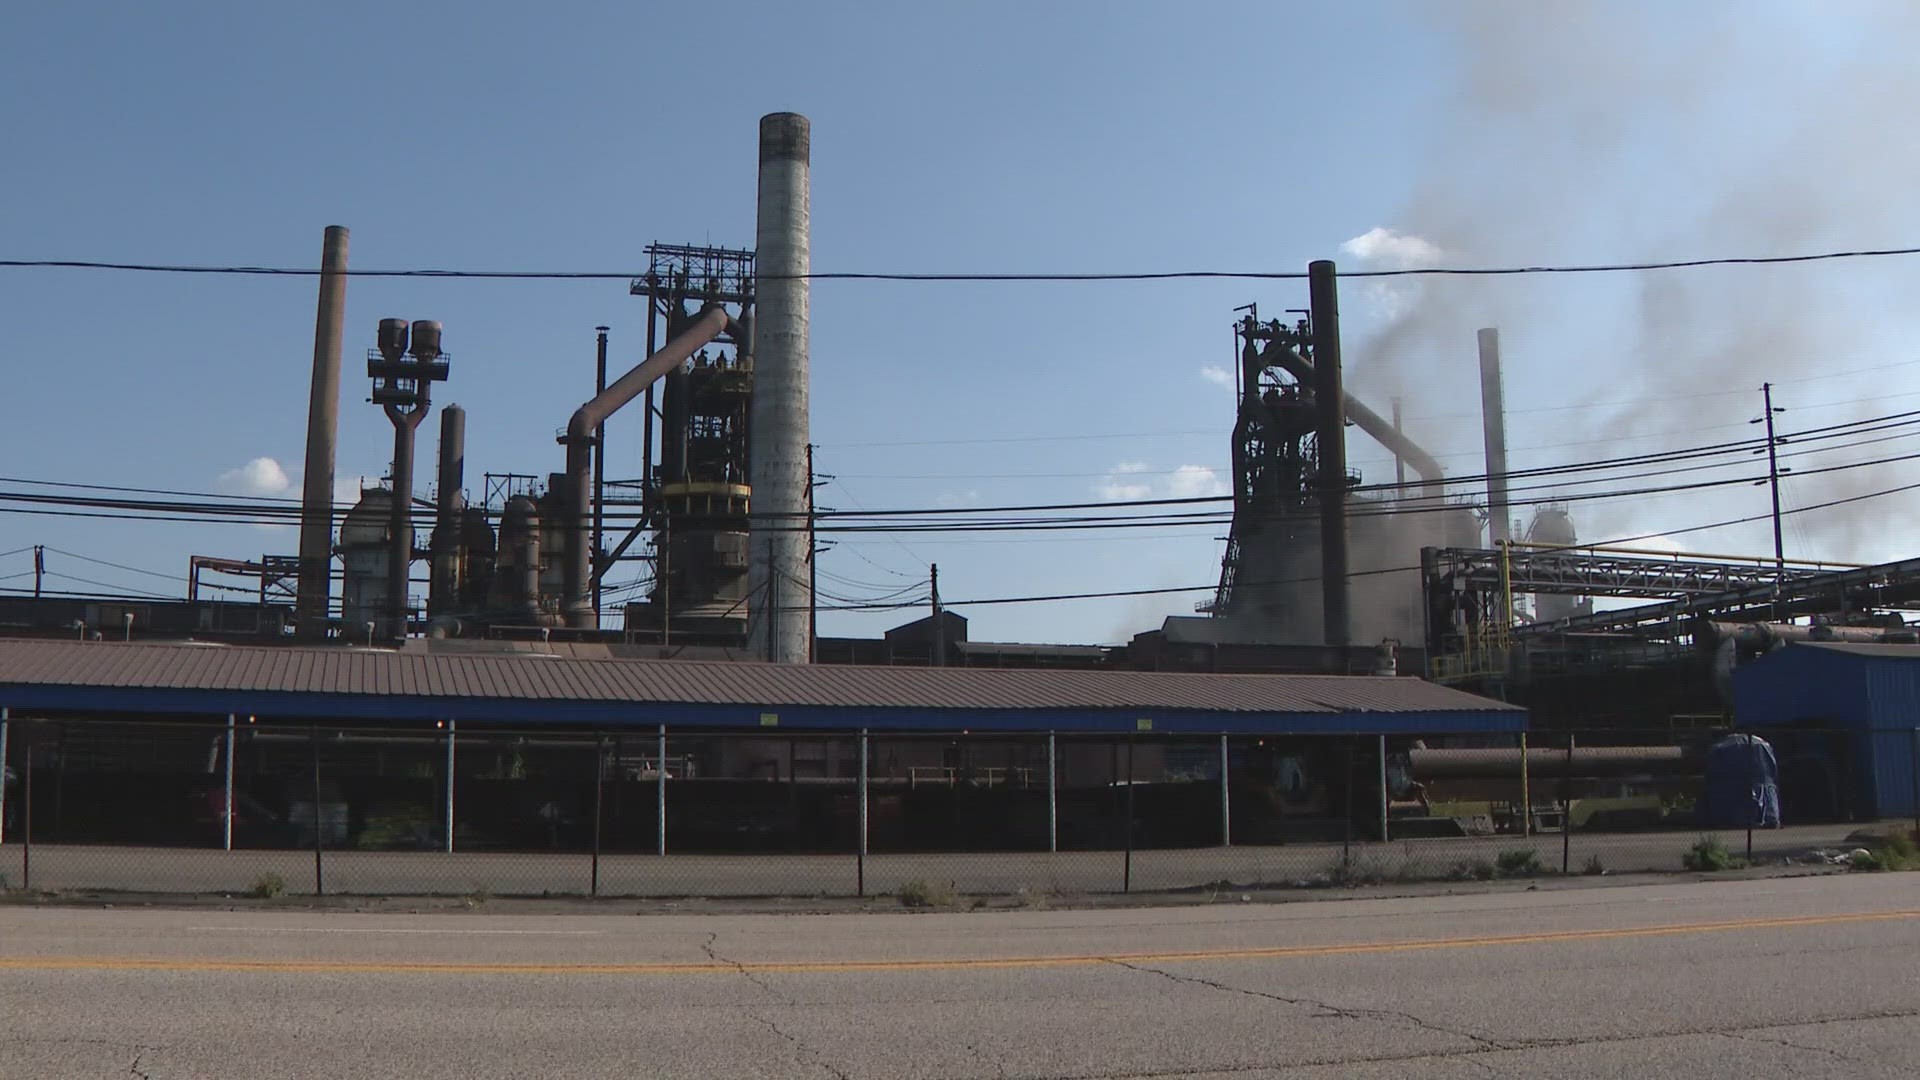 U.S. Steel announced it would be idling steelmaking at the Granite City Works plant indefinitely. It will likely lead to hundreds of layoffs.